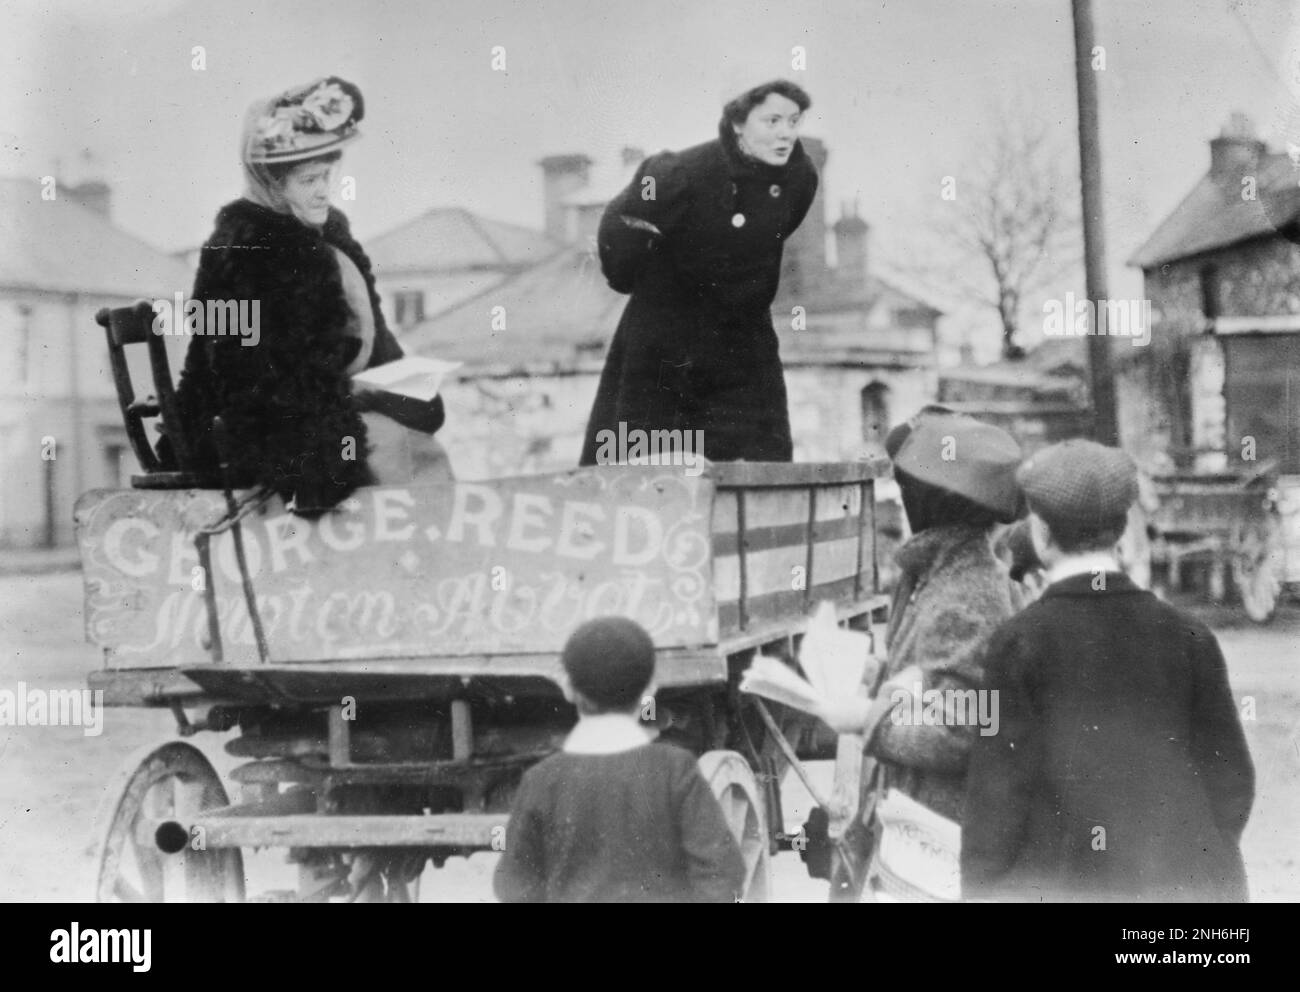 Suffragette, probably Edith Splatt, speaking to sparse group of people from a Newton Abbot cart - c1913 Stock Photo